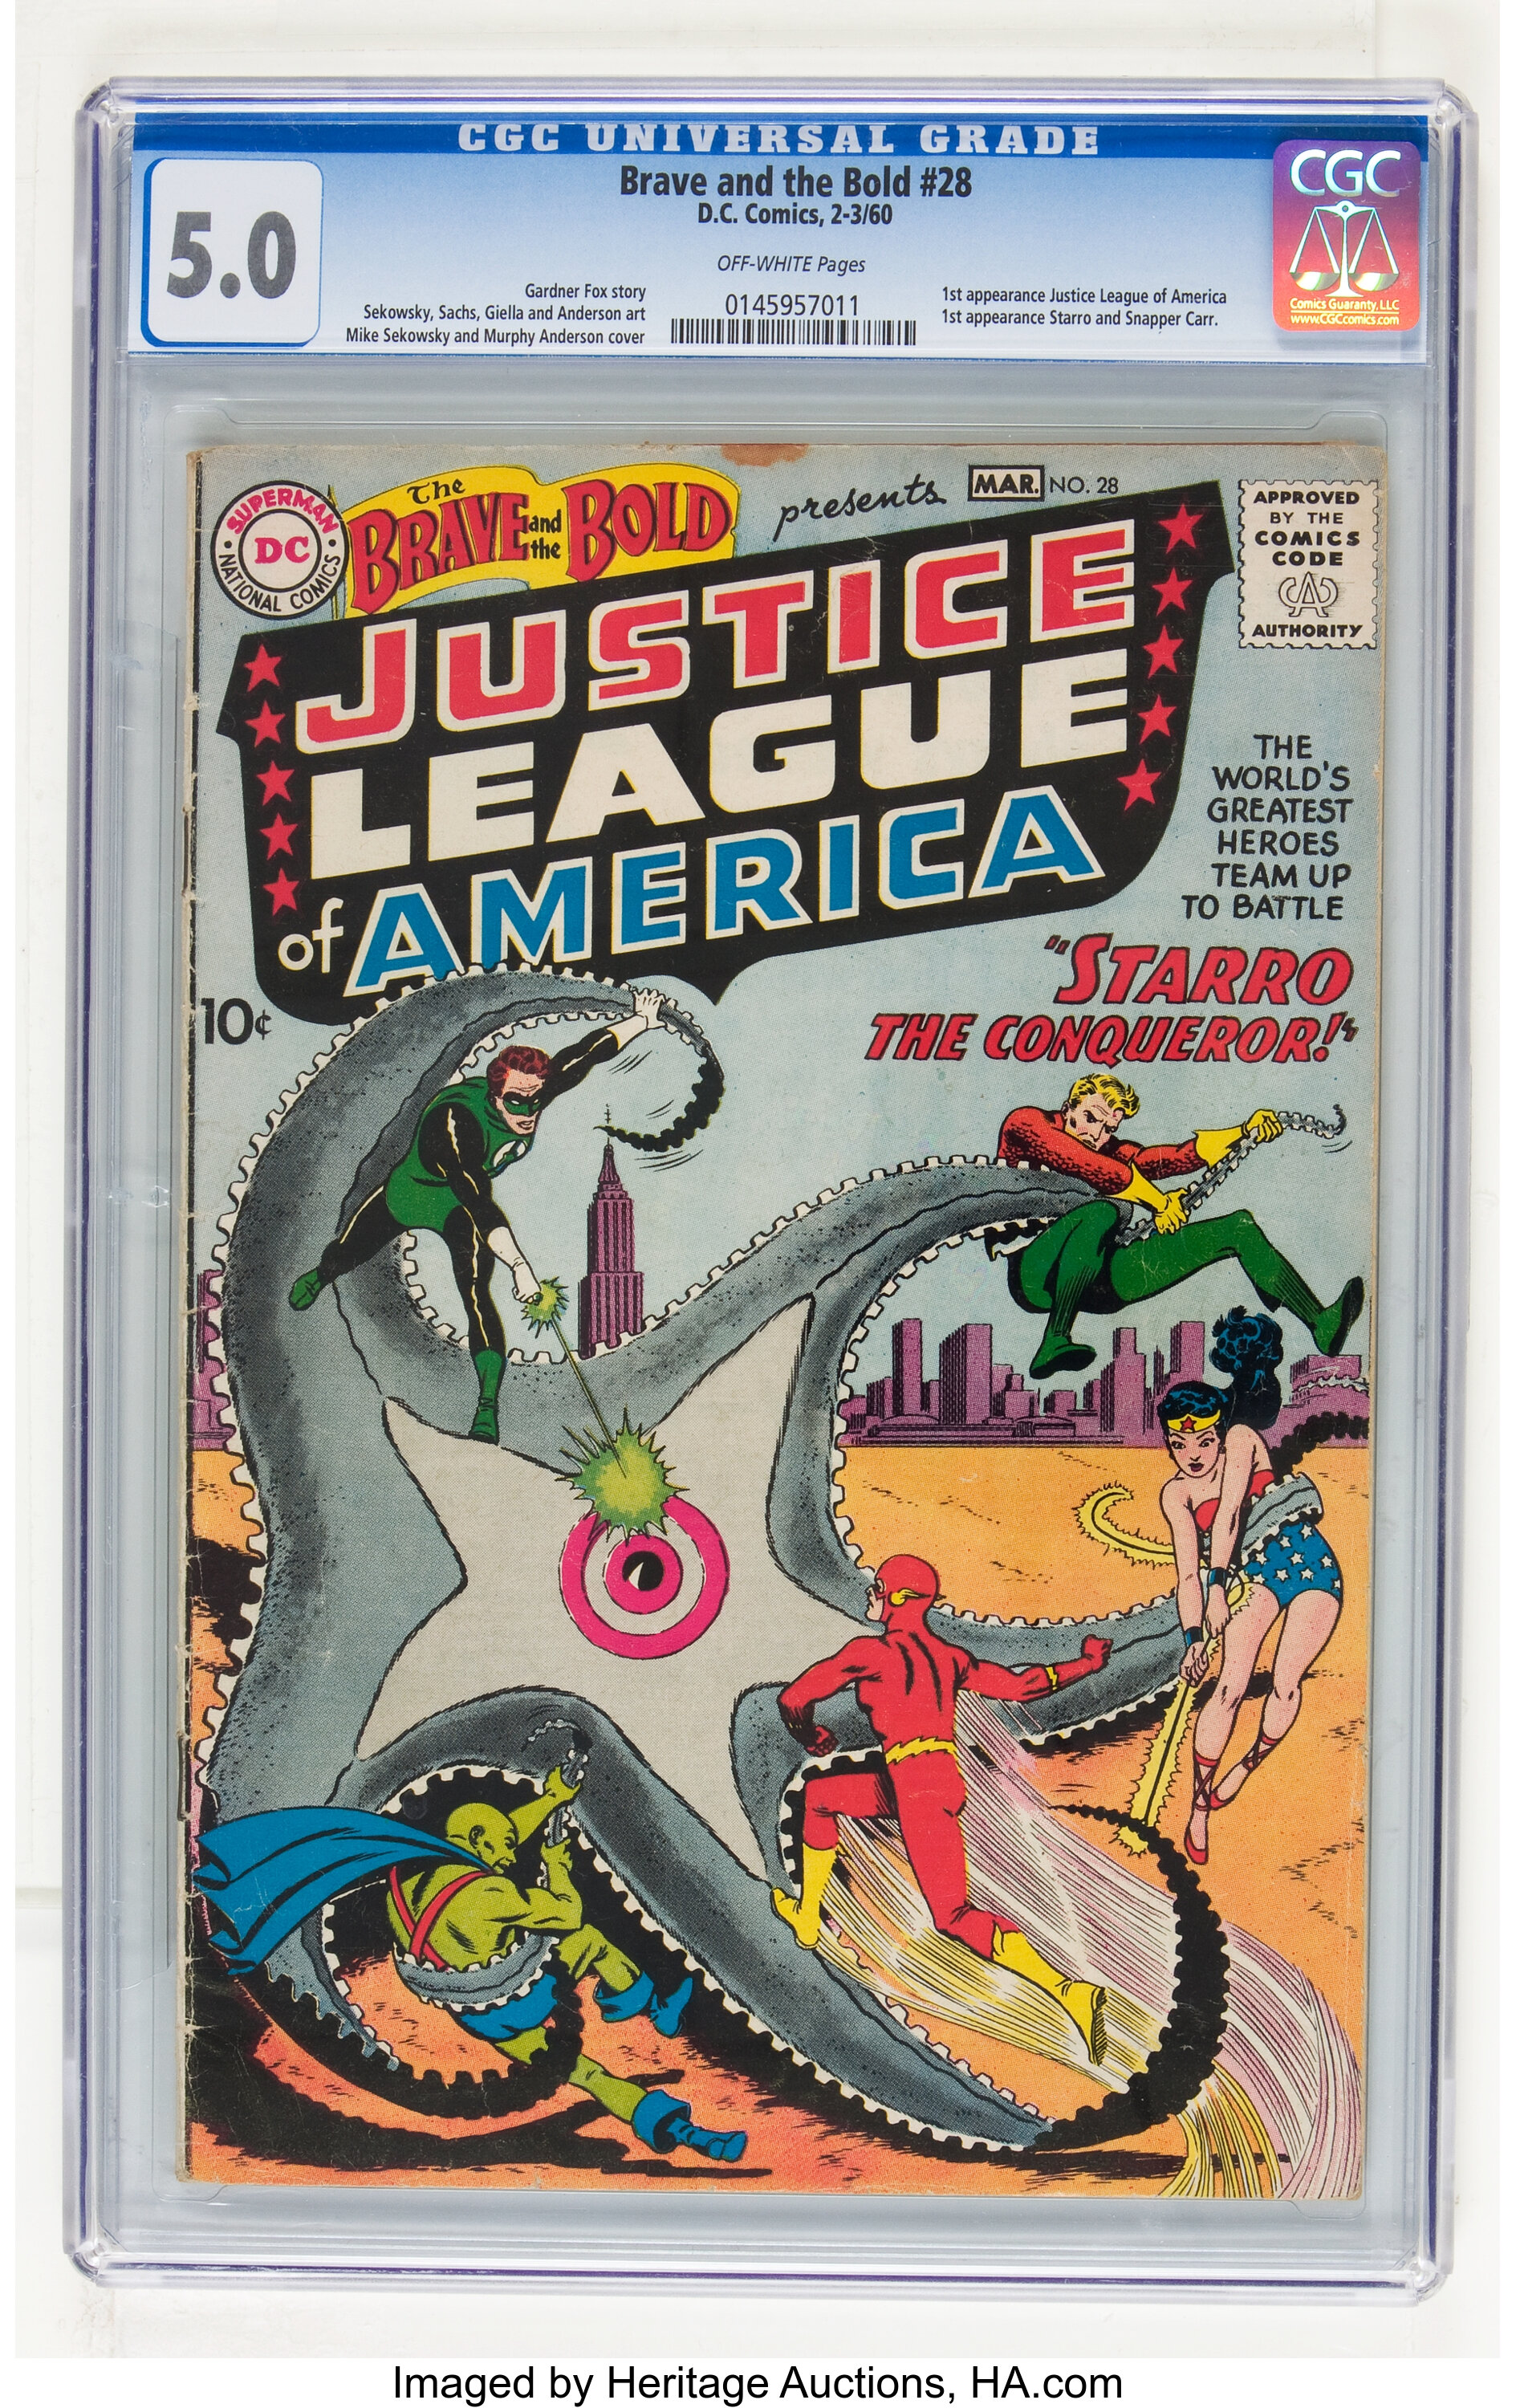 The Brave and the Bold #28 Story and Page Count - DC Comics 1960 - 1st  Justice League of America 